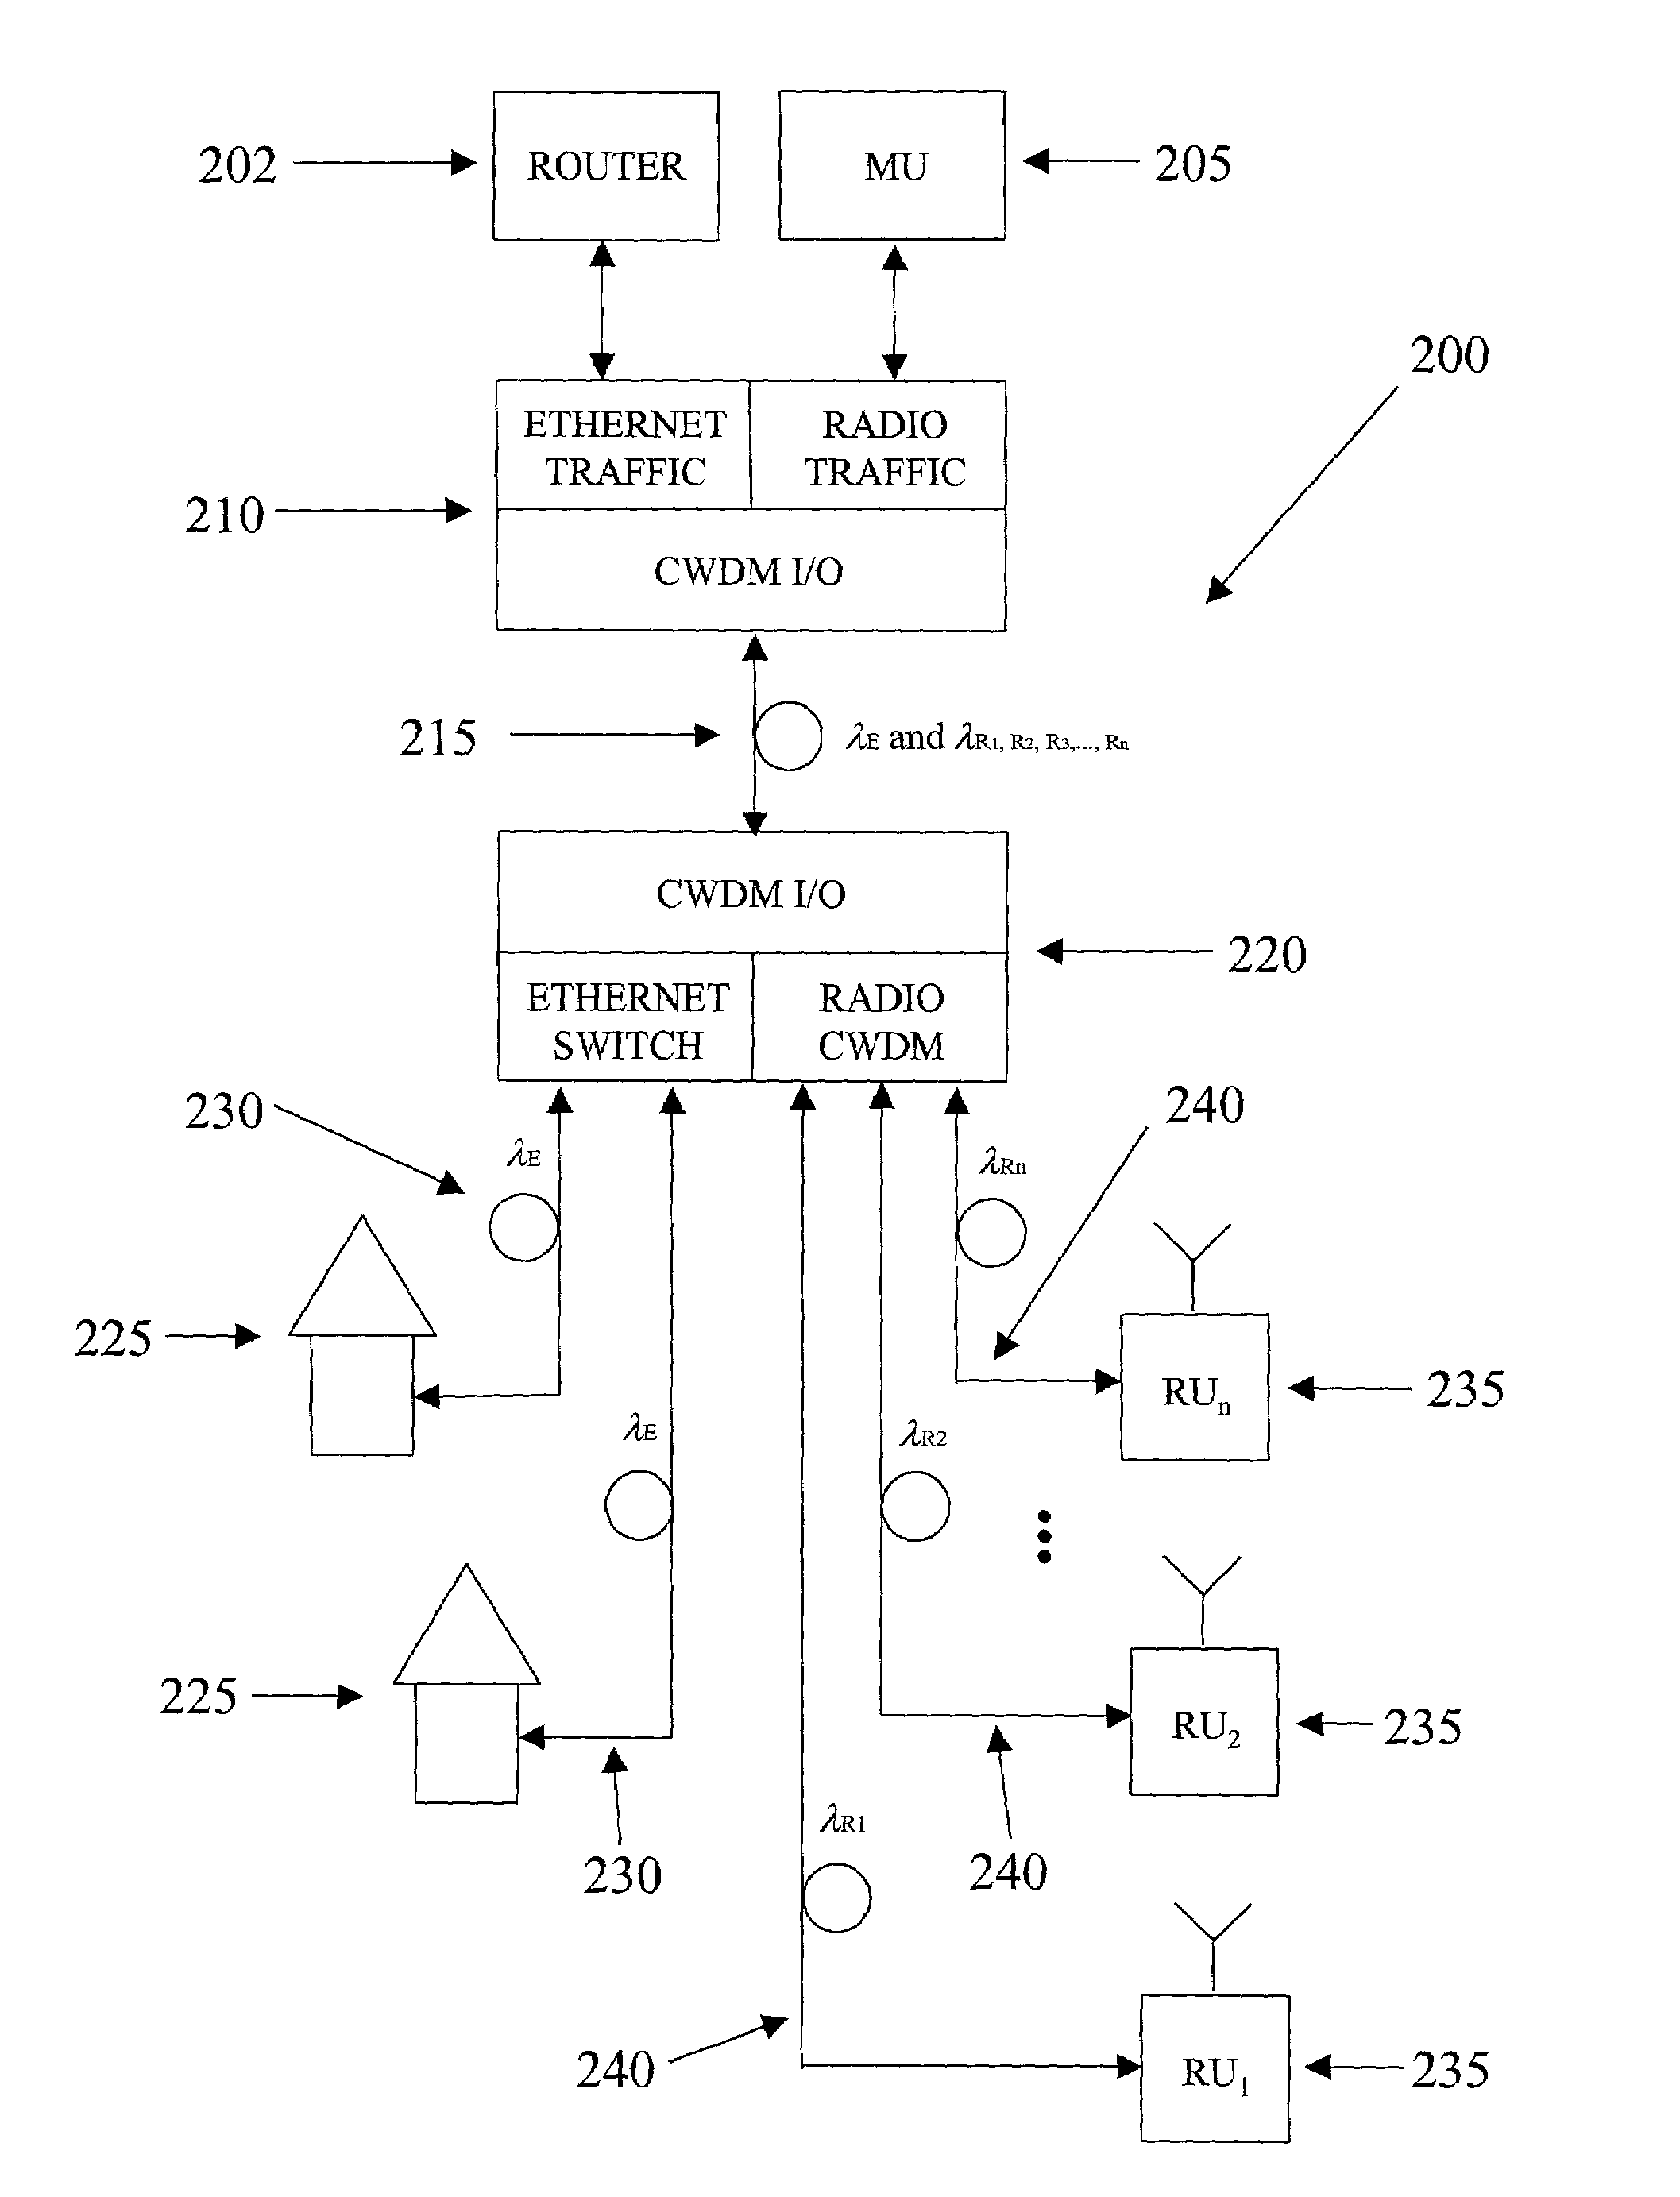 System and method for integrating a fiber optic fixed access network and a fiber optic radio access network